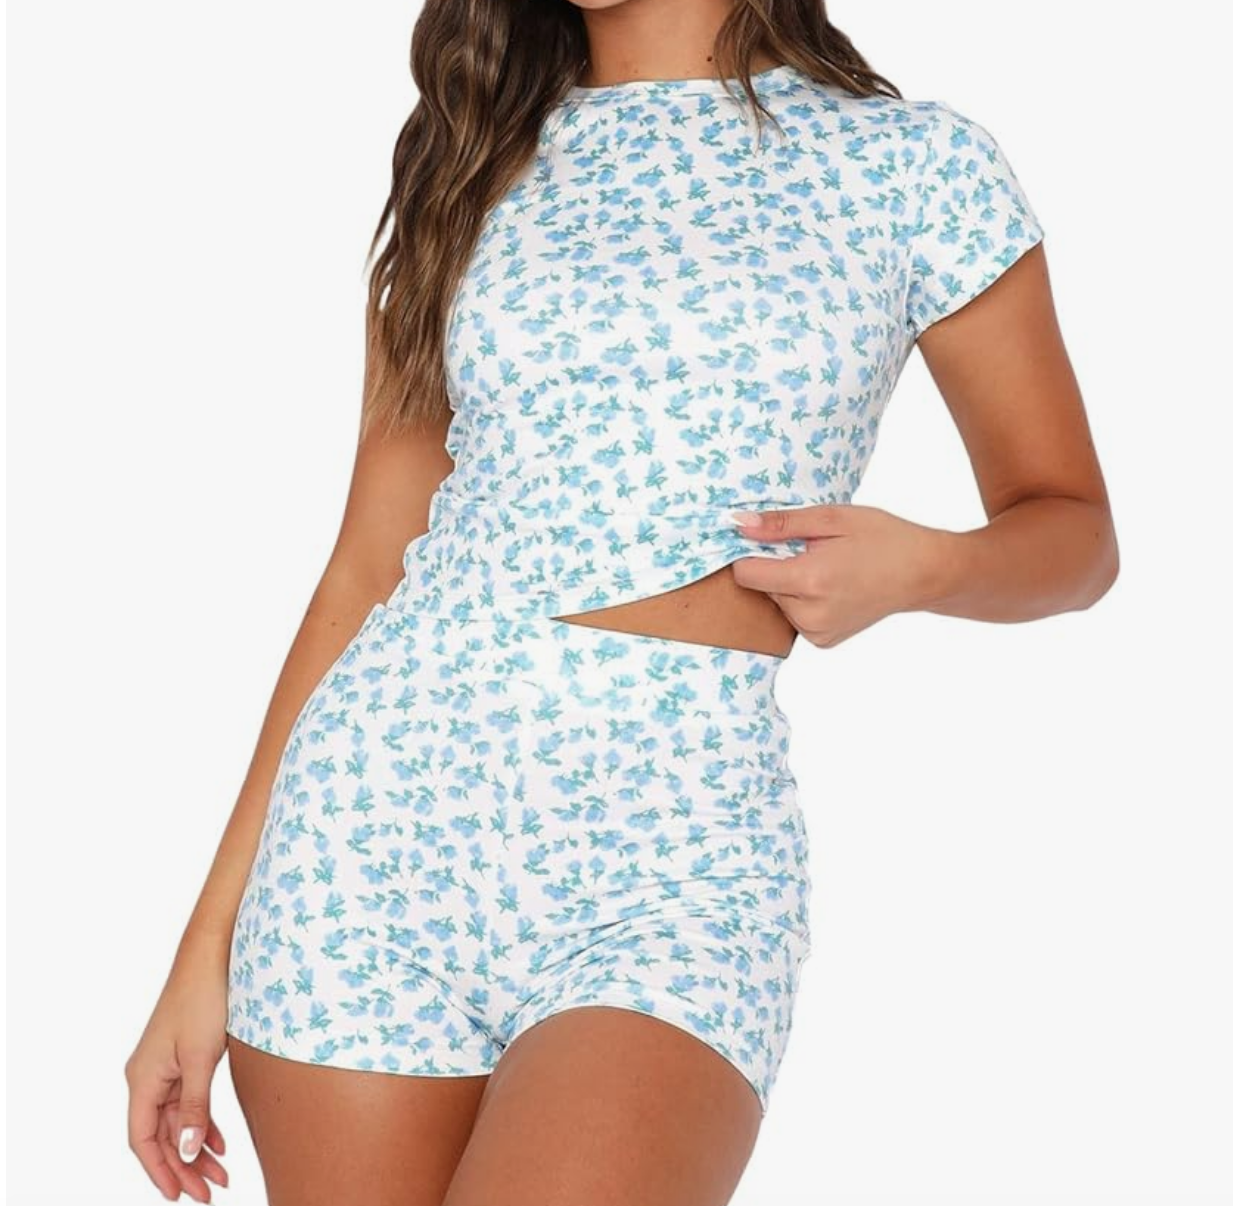 https://www.bigblondehair.com/wp-content/uploads/2023/12/Madison-LeCroys-White-and-Blue-Floral-Pajama-Set-2-e1702649551667.png